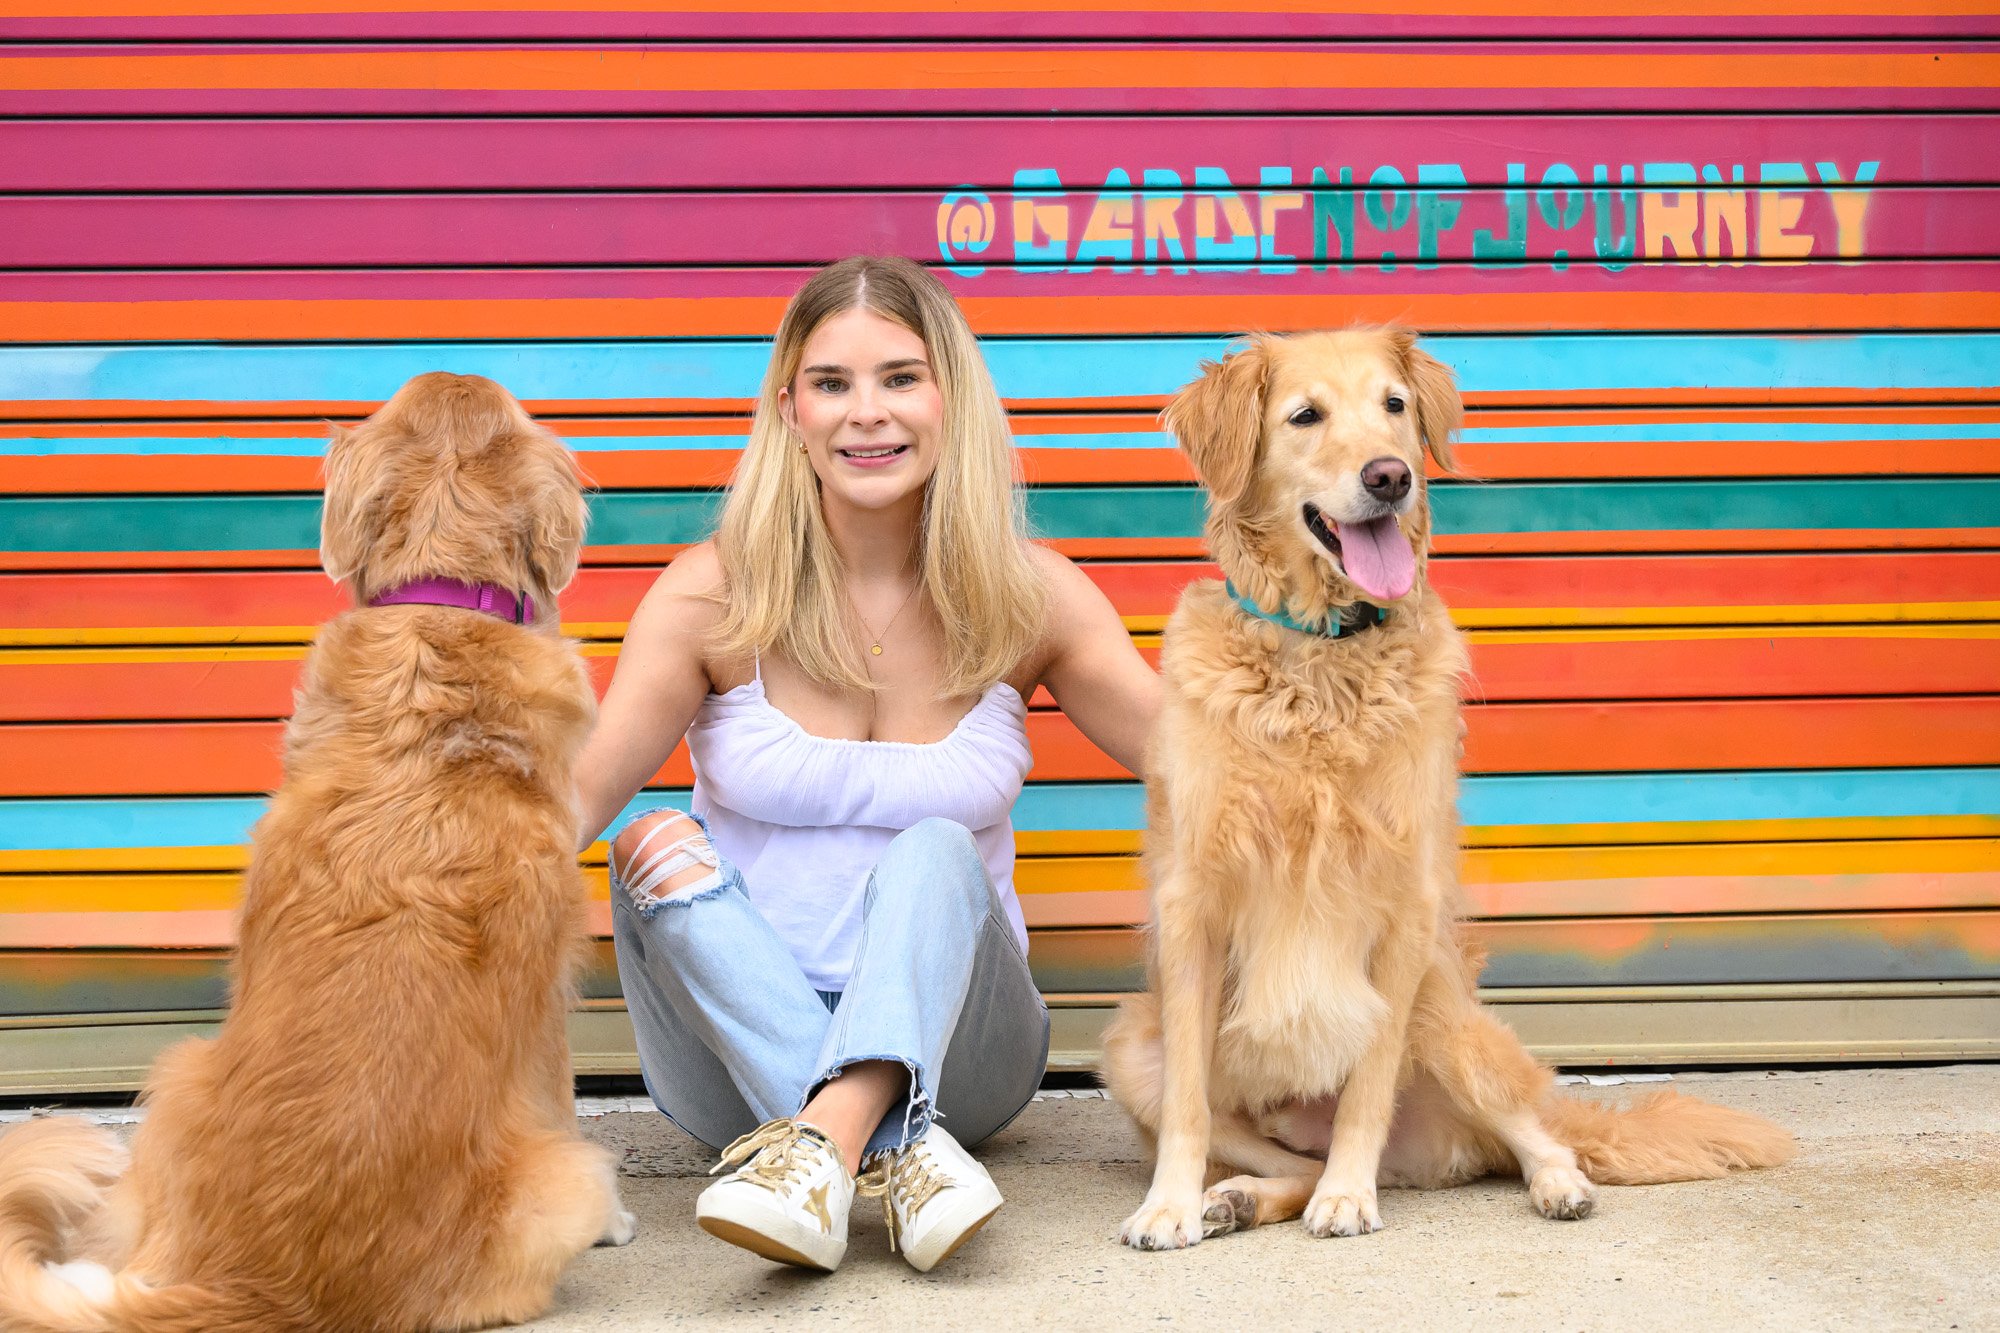 blooper with 2 golden retrievers and dog mom